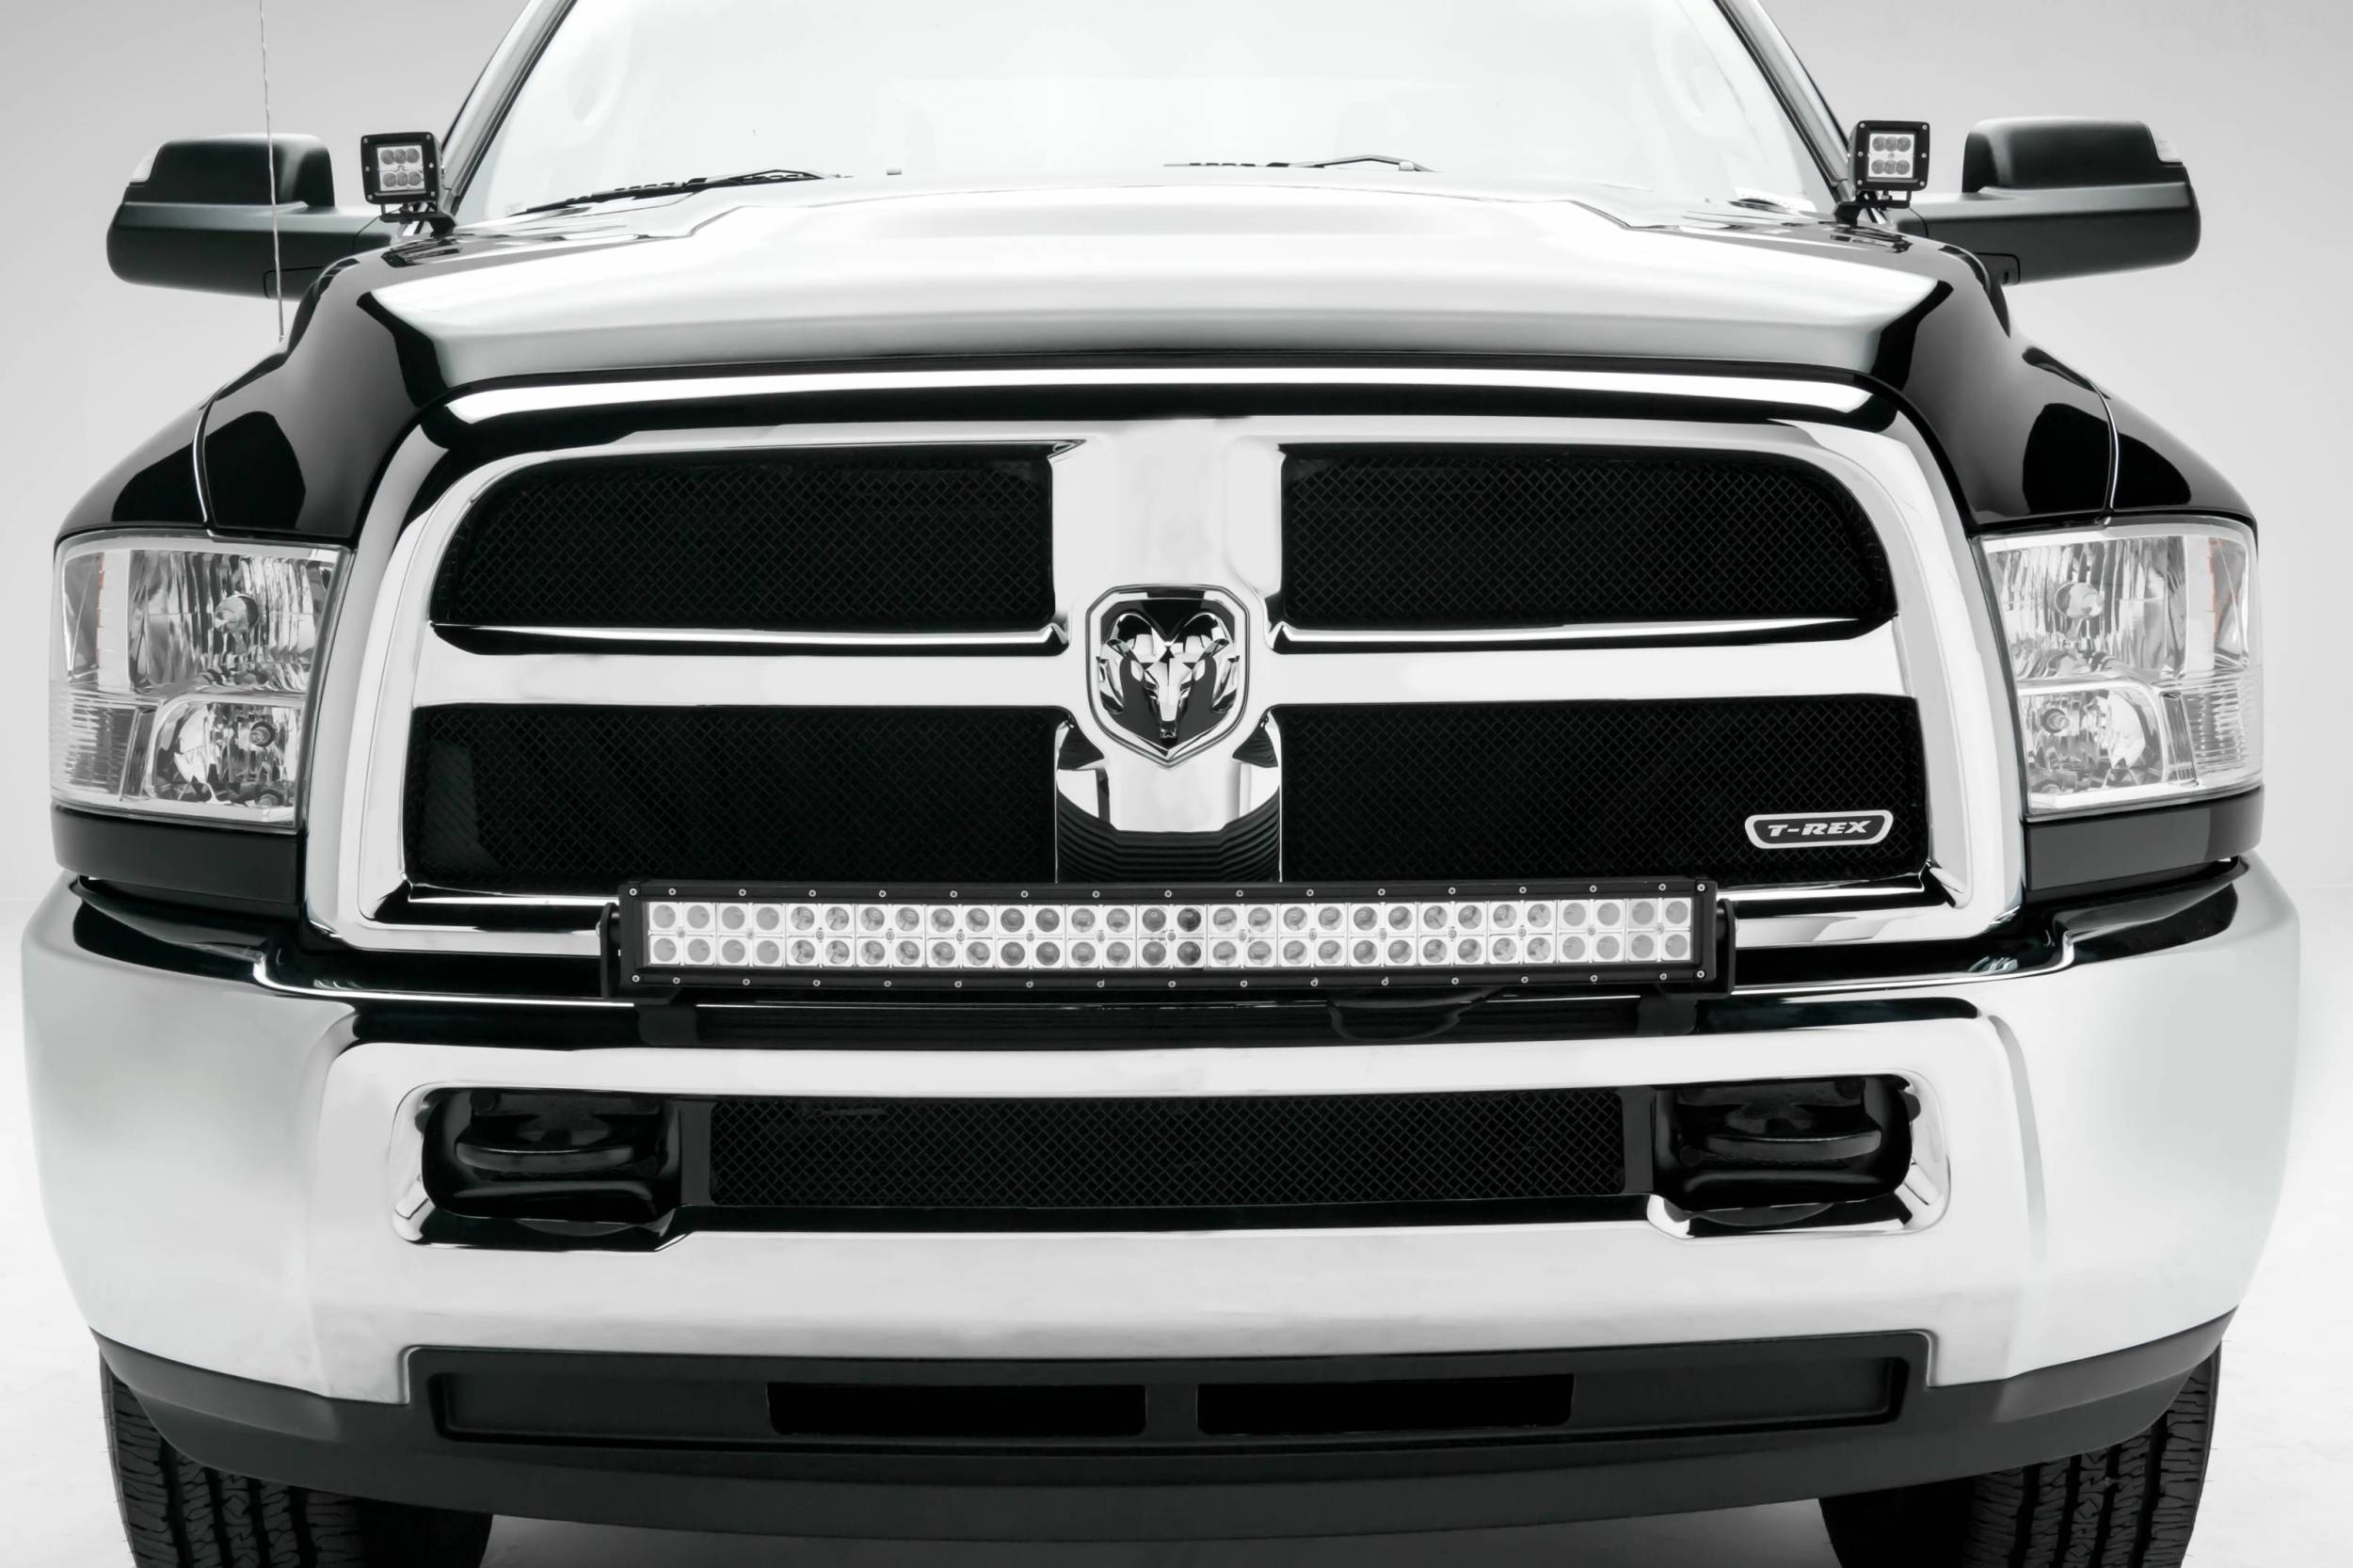 ZROADZ OFF ROAD PRODUCTS - 2010-2018 Ram 2500, 3500 Front Bumper Top LED Bracket to mount (1) 30 Inch LED Light Bar - Part # Z324522